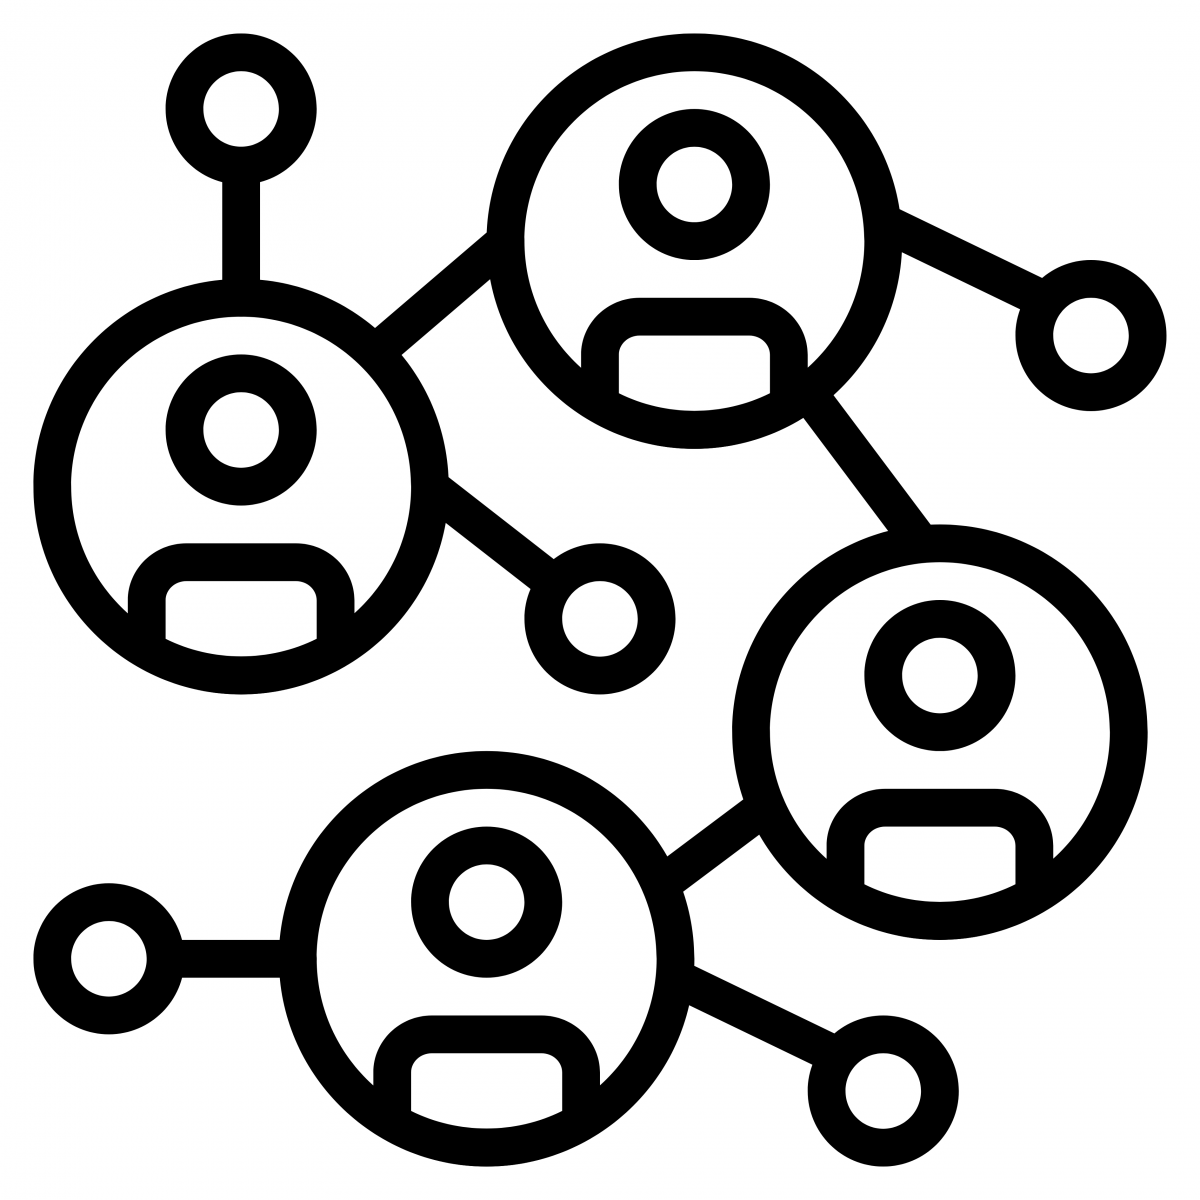 A network or individuals black icon. 